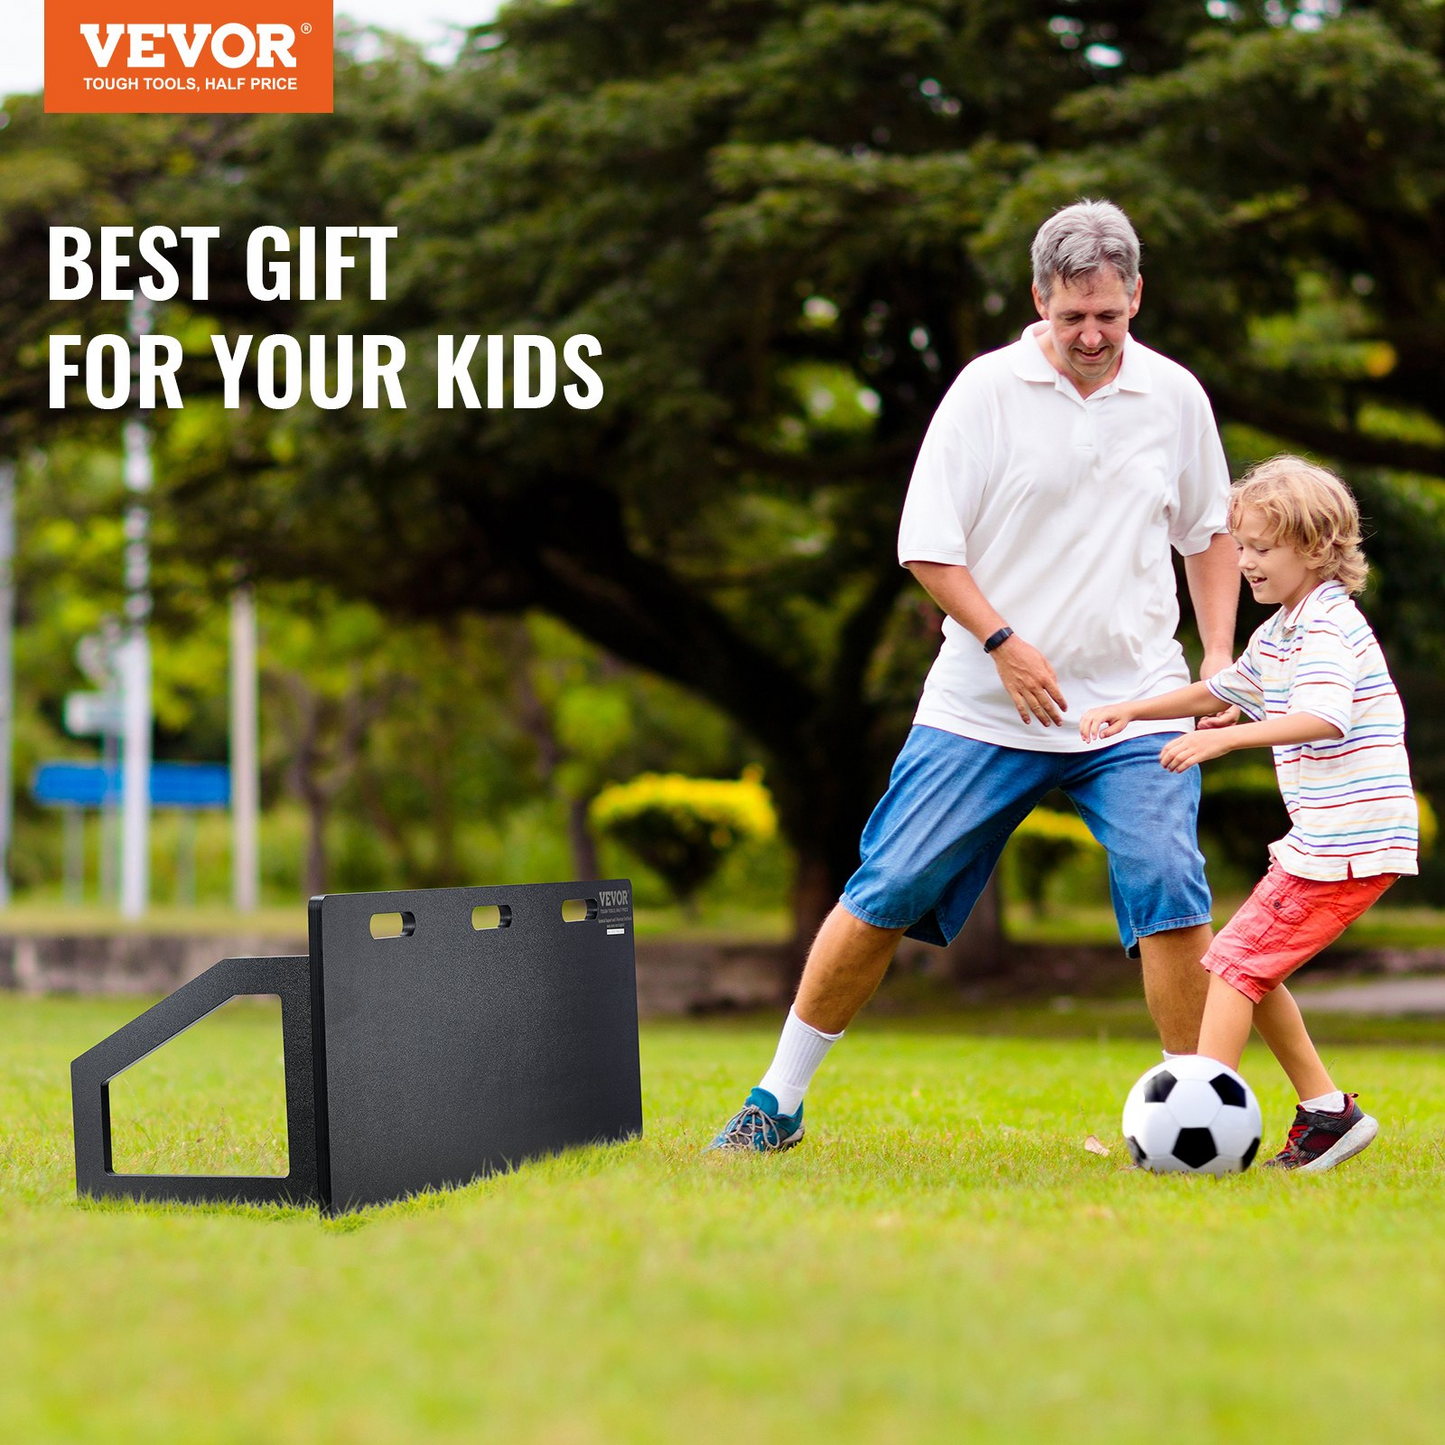 VEVOR Soccer Rebounder Board - Portable Soccer Wall with 2 Angles Rebound, Goodies N Stuff